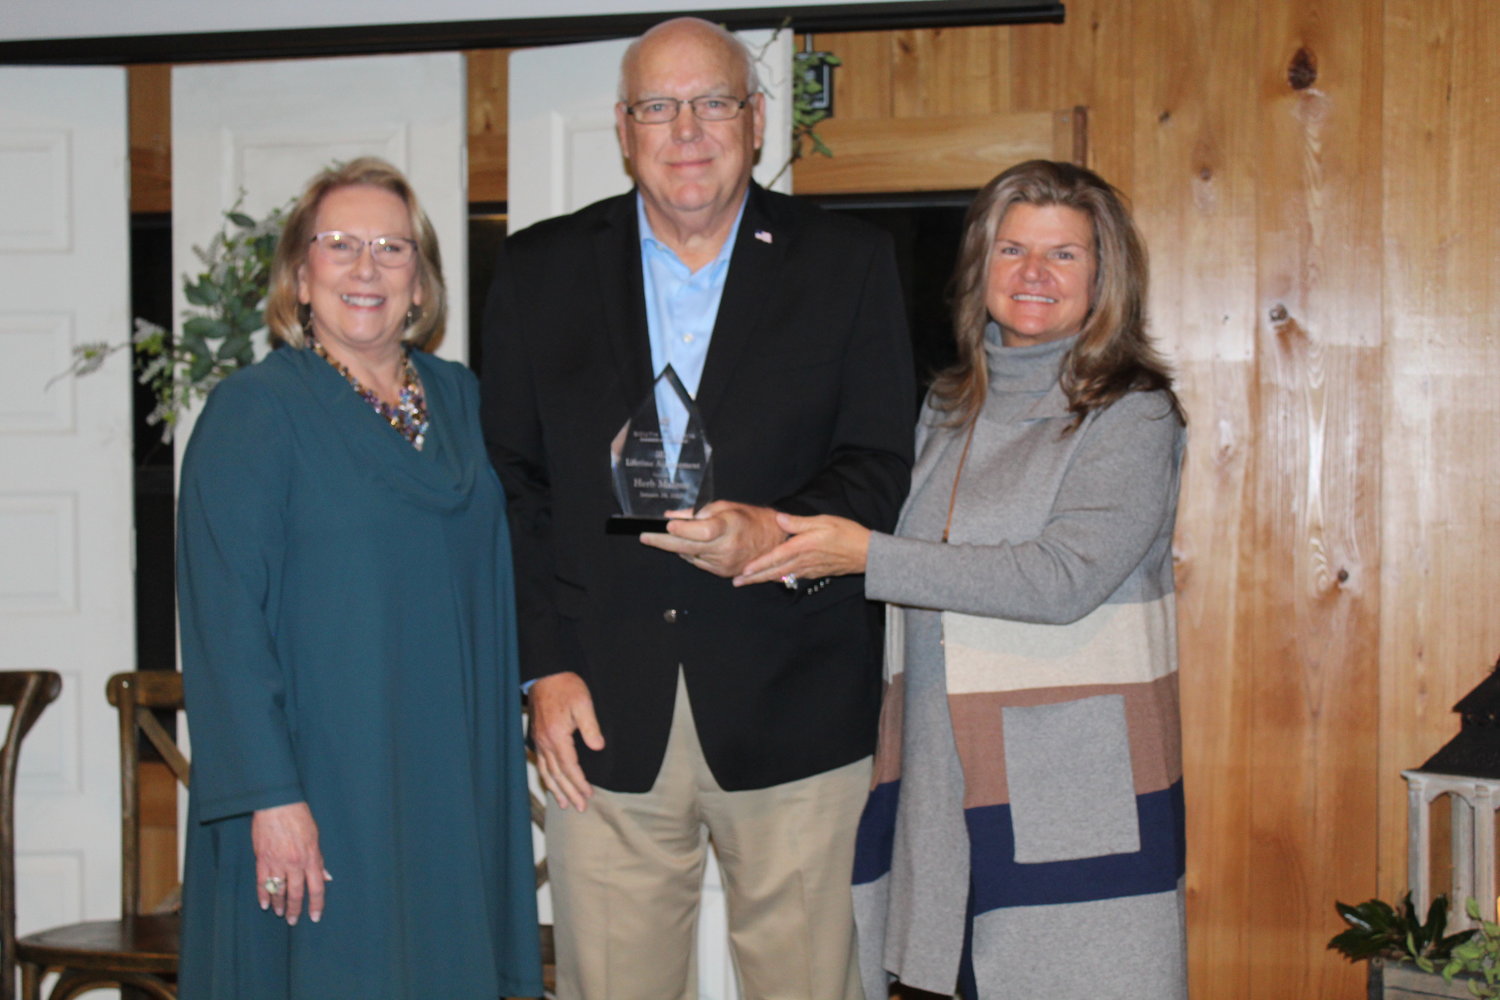 Donna Watts and Charlene Haber present the Lifetime Achievement Award to Herb Malone, recently retired director of Gulf Shores Orange Beach Tourism.